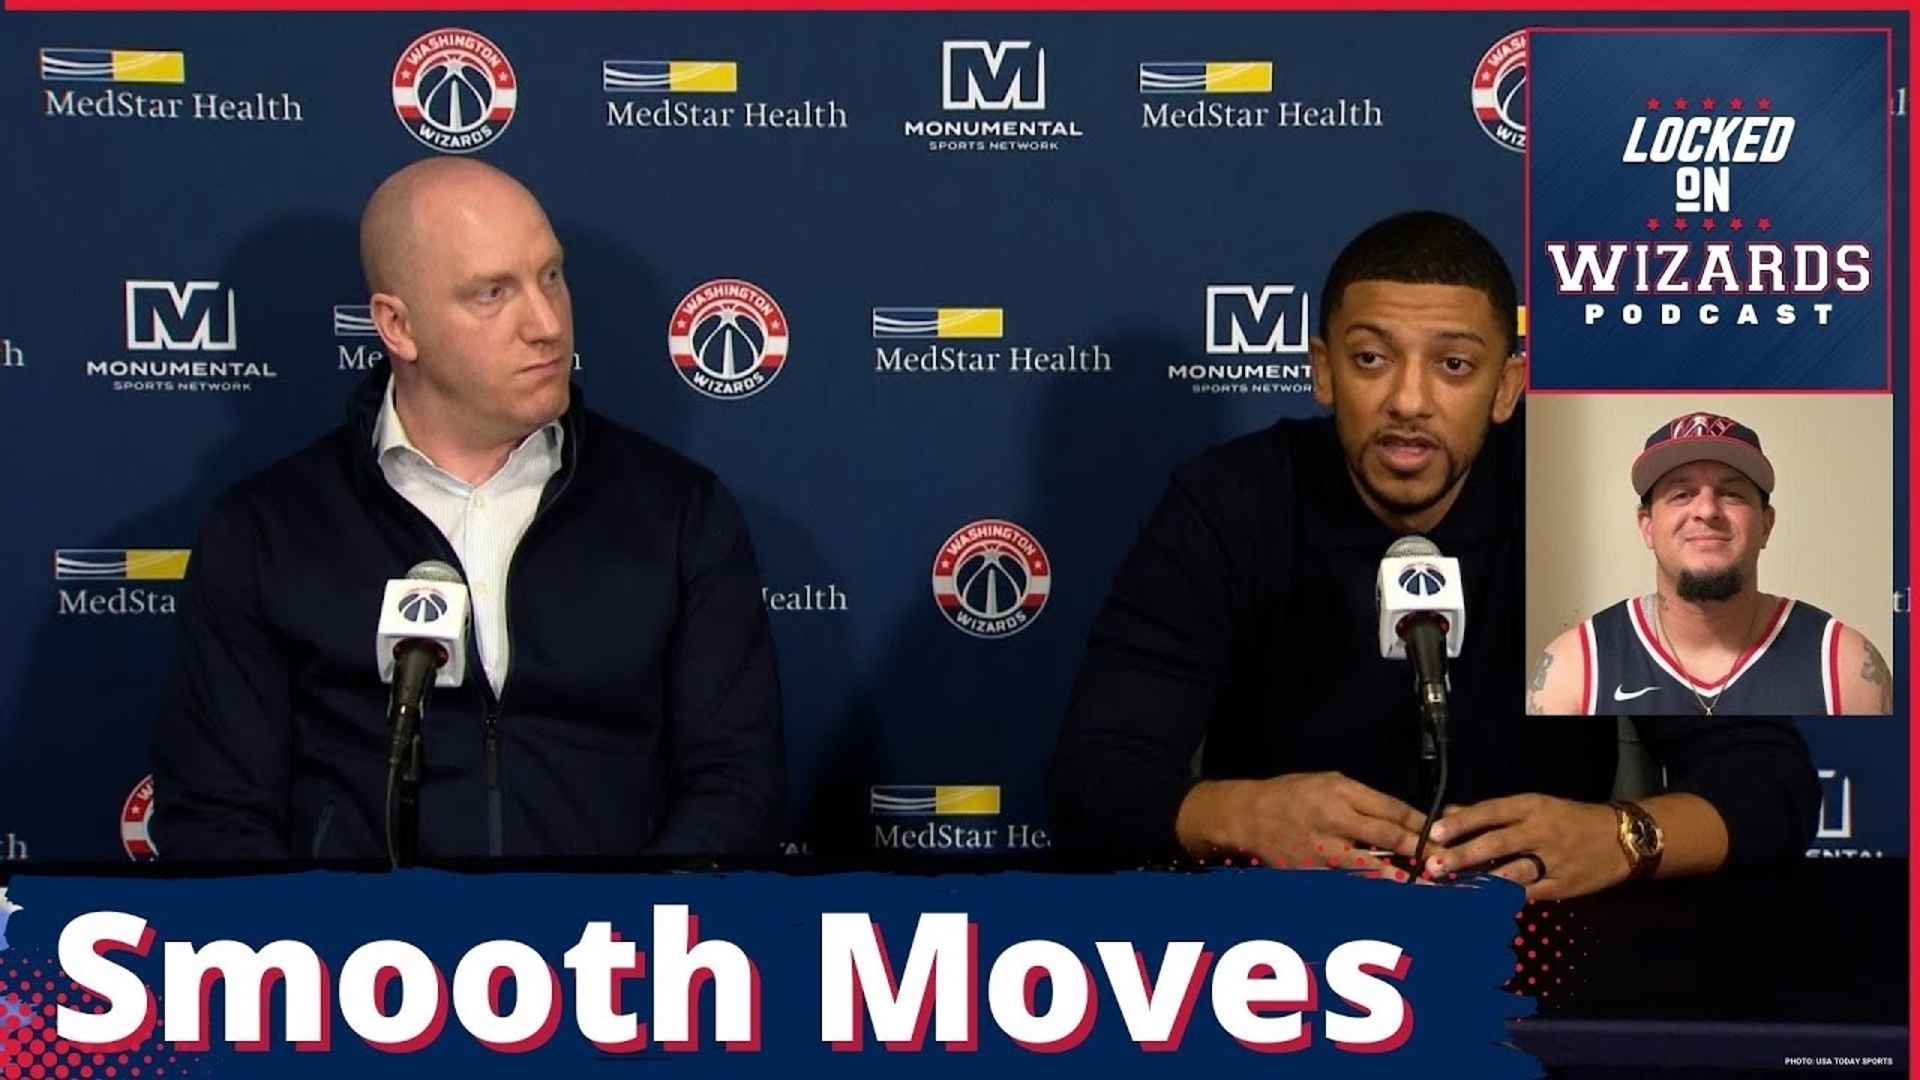 Brandon breaks down the three best moves made by the Front Office this season. He also looks at who was the best player on the bench this season.